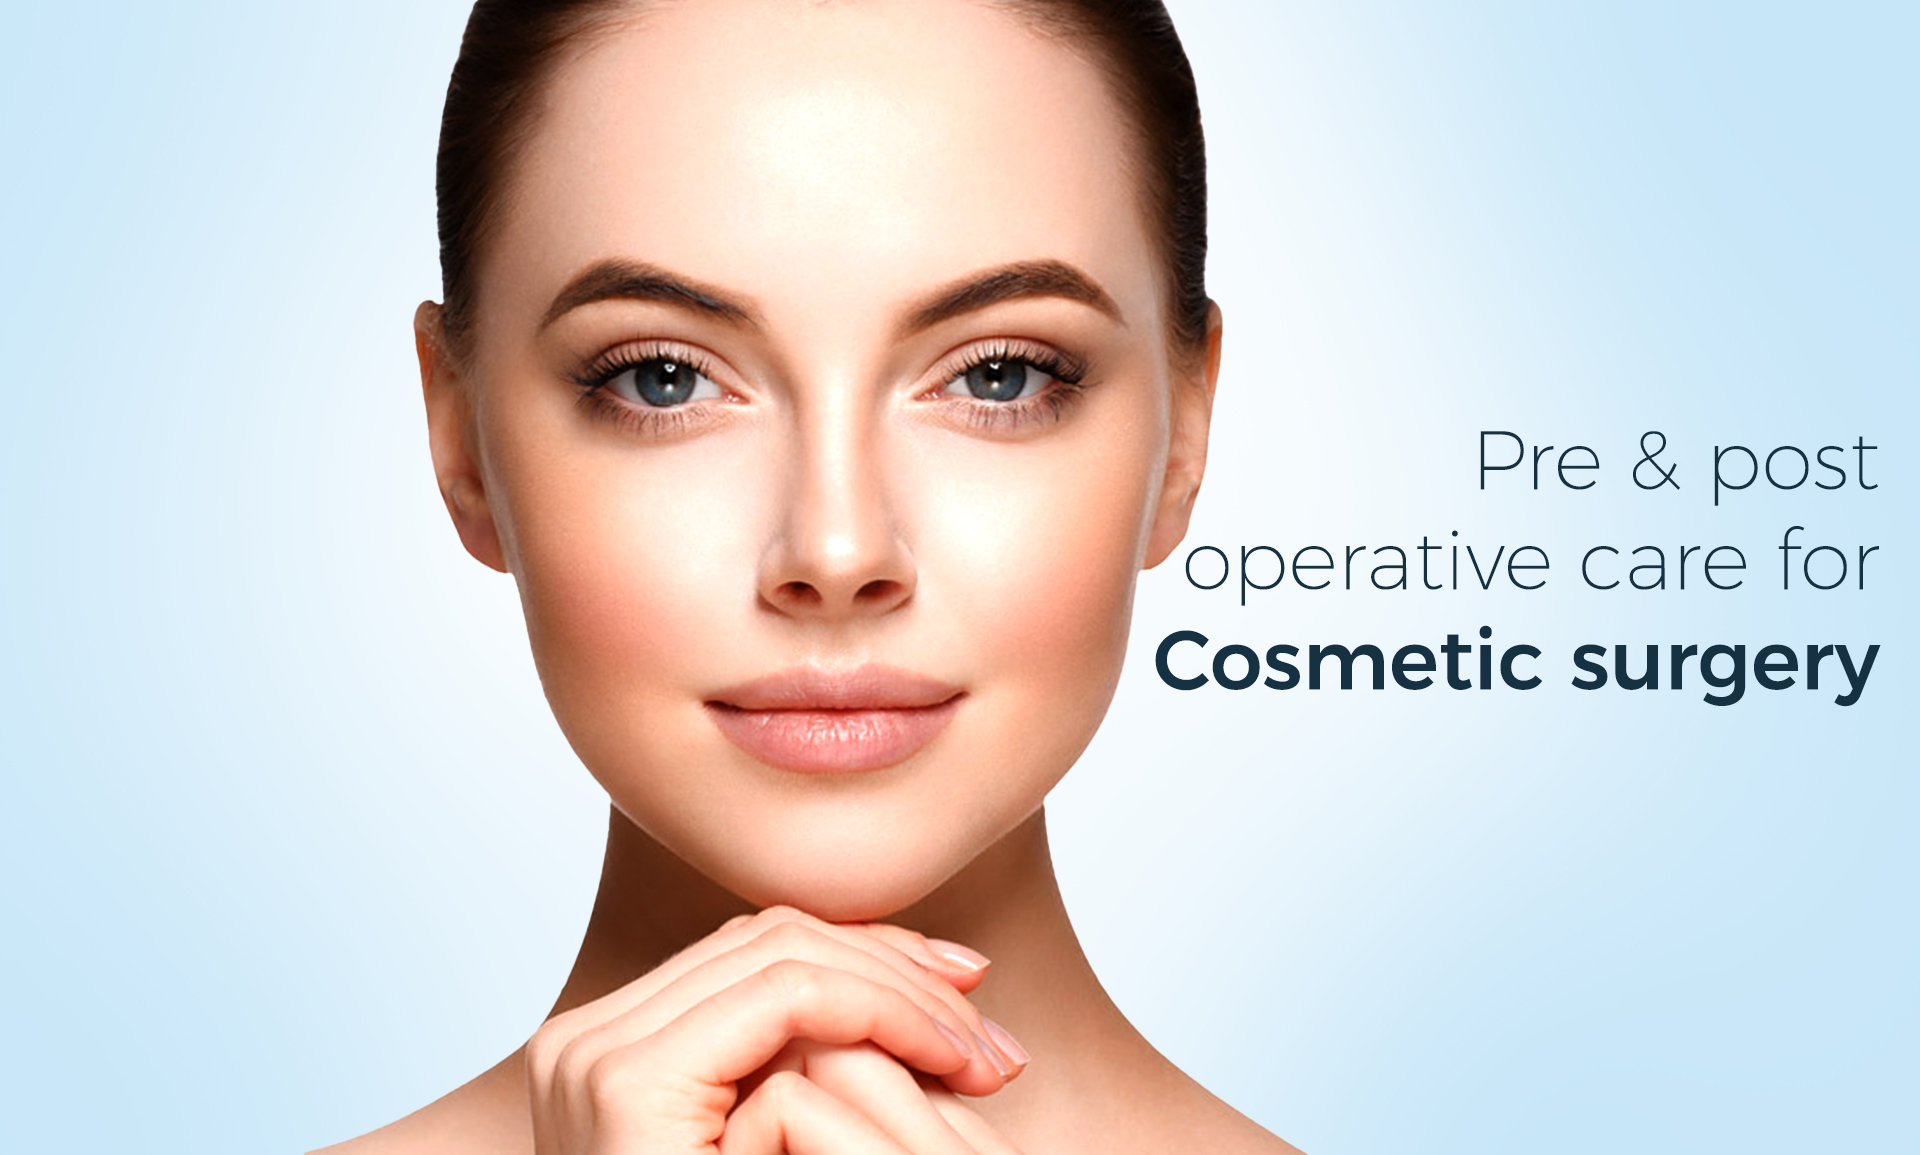 The Importance of Pre- and Post-Operative Care for Cosmetic Surgery